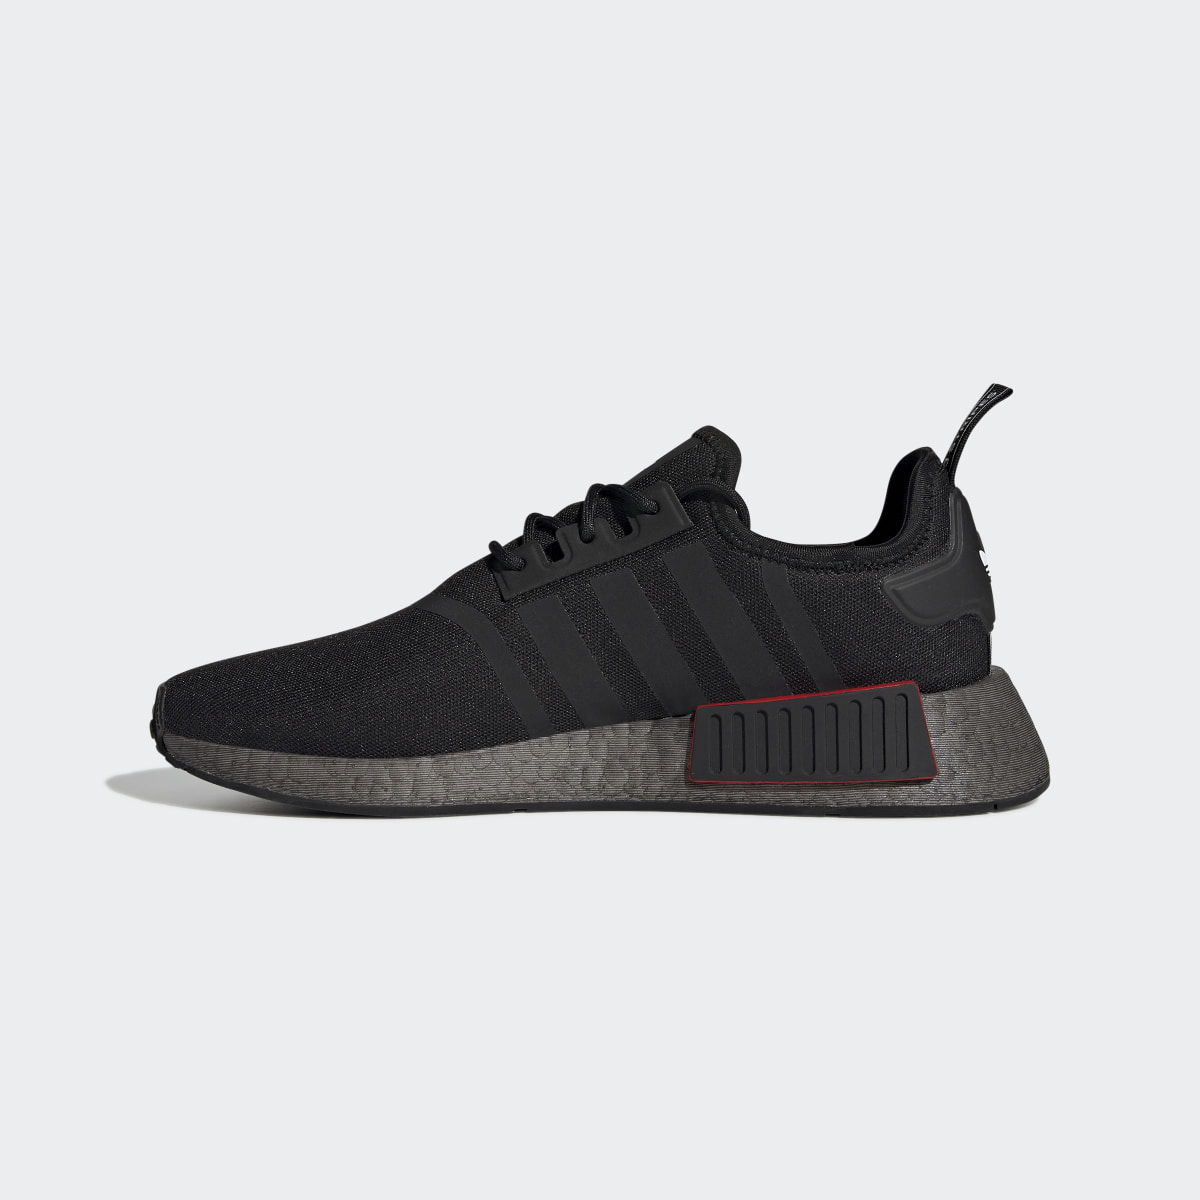 Adidas NMD_R1 Shoes. 7